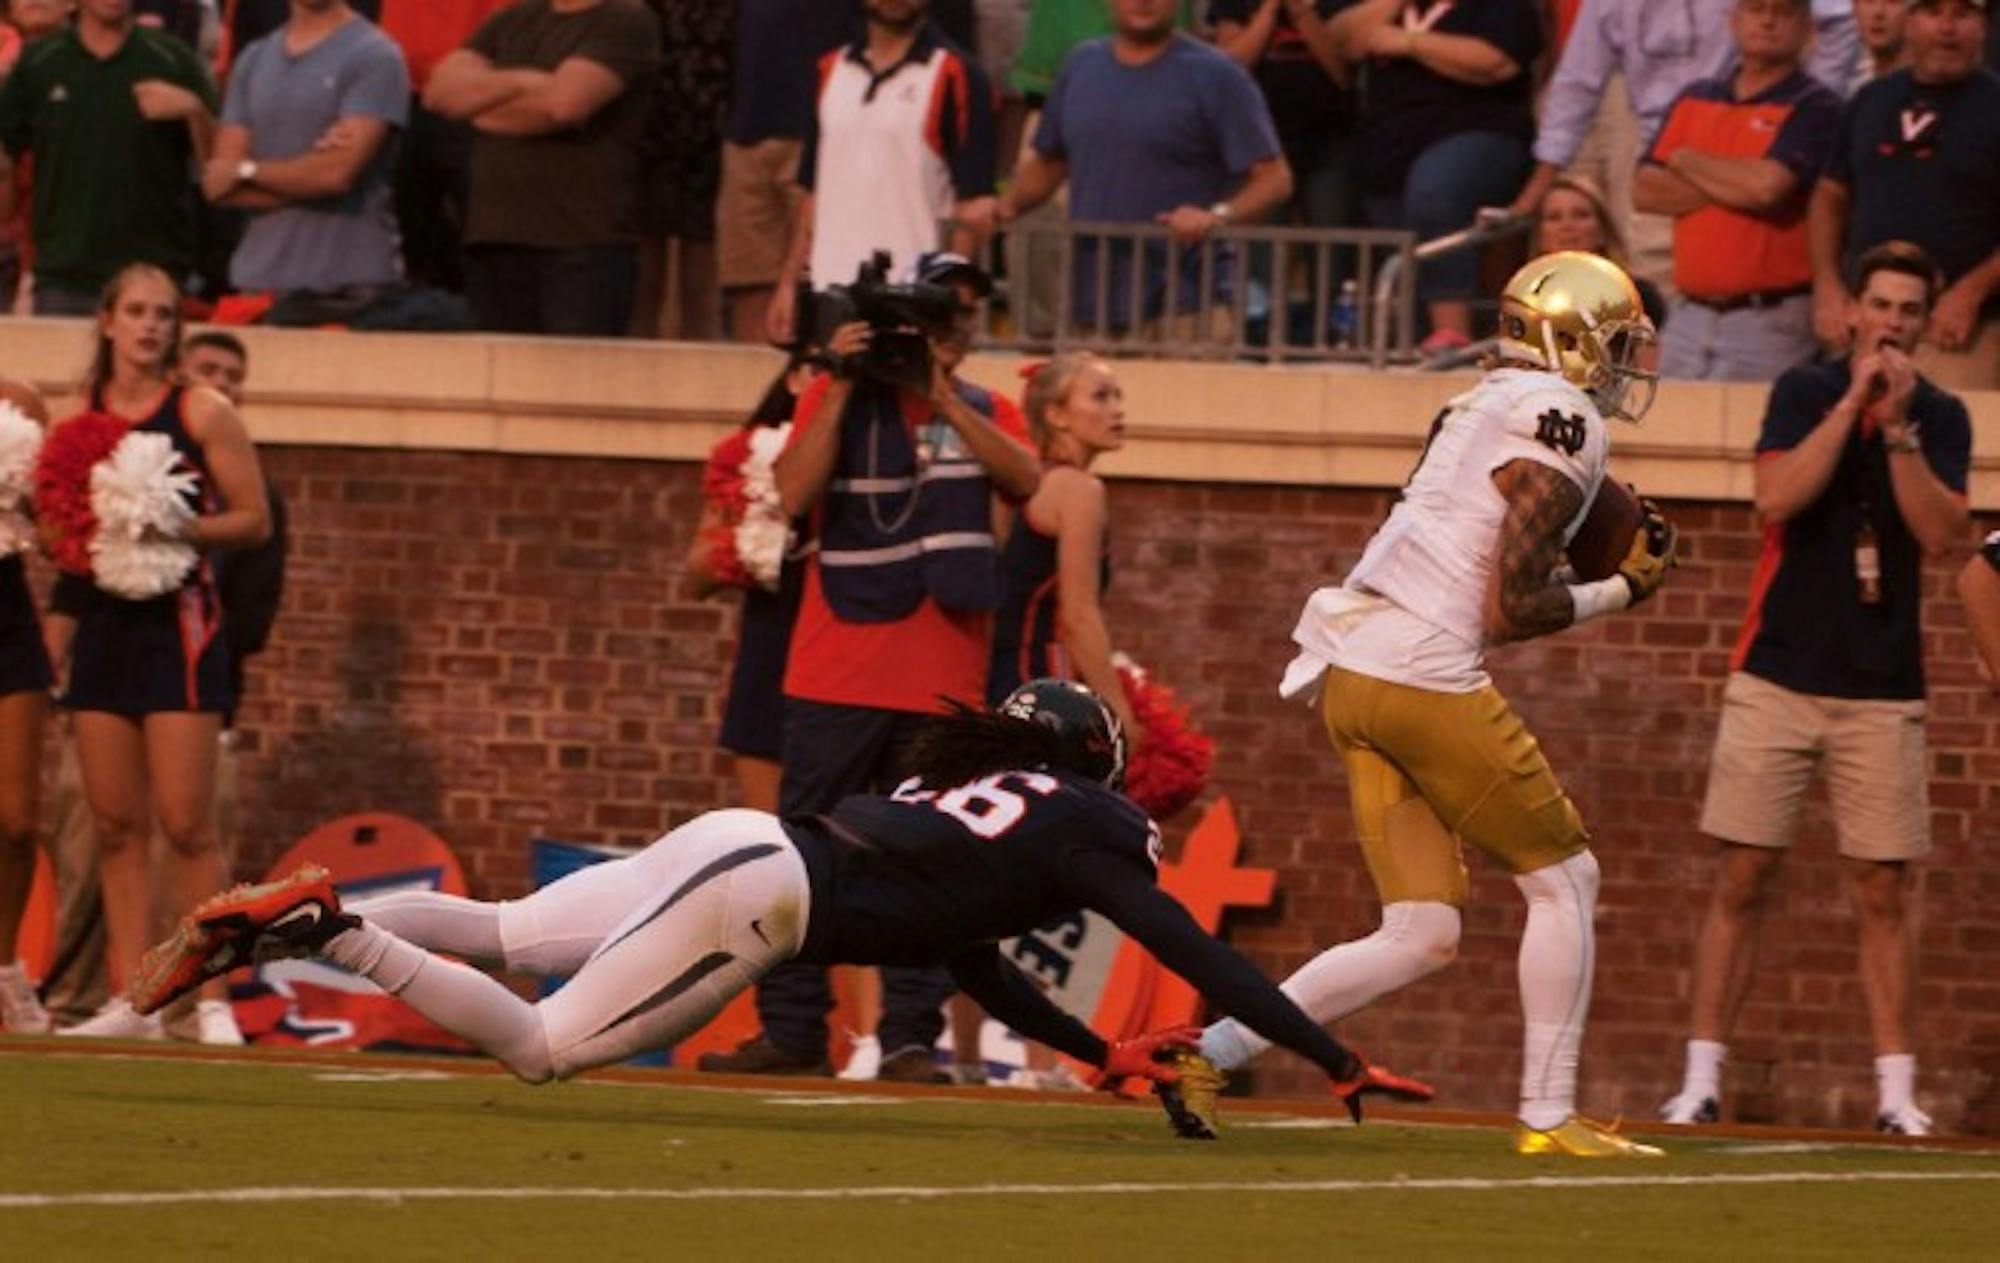 Irish junior receiver Will Fuller scores the game-winning touchdown in the final minute of Notre Dame’s 34-27, come-from-behind win at Virginia on Sept. 12 at Scott Stadium in Charlottesville, Virginia.